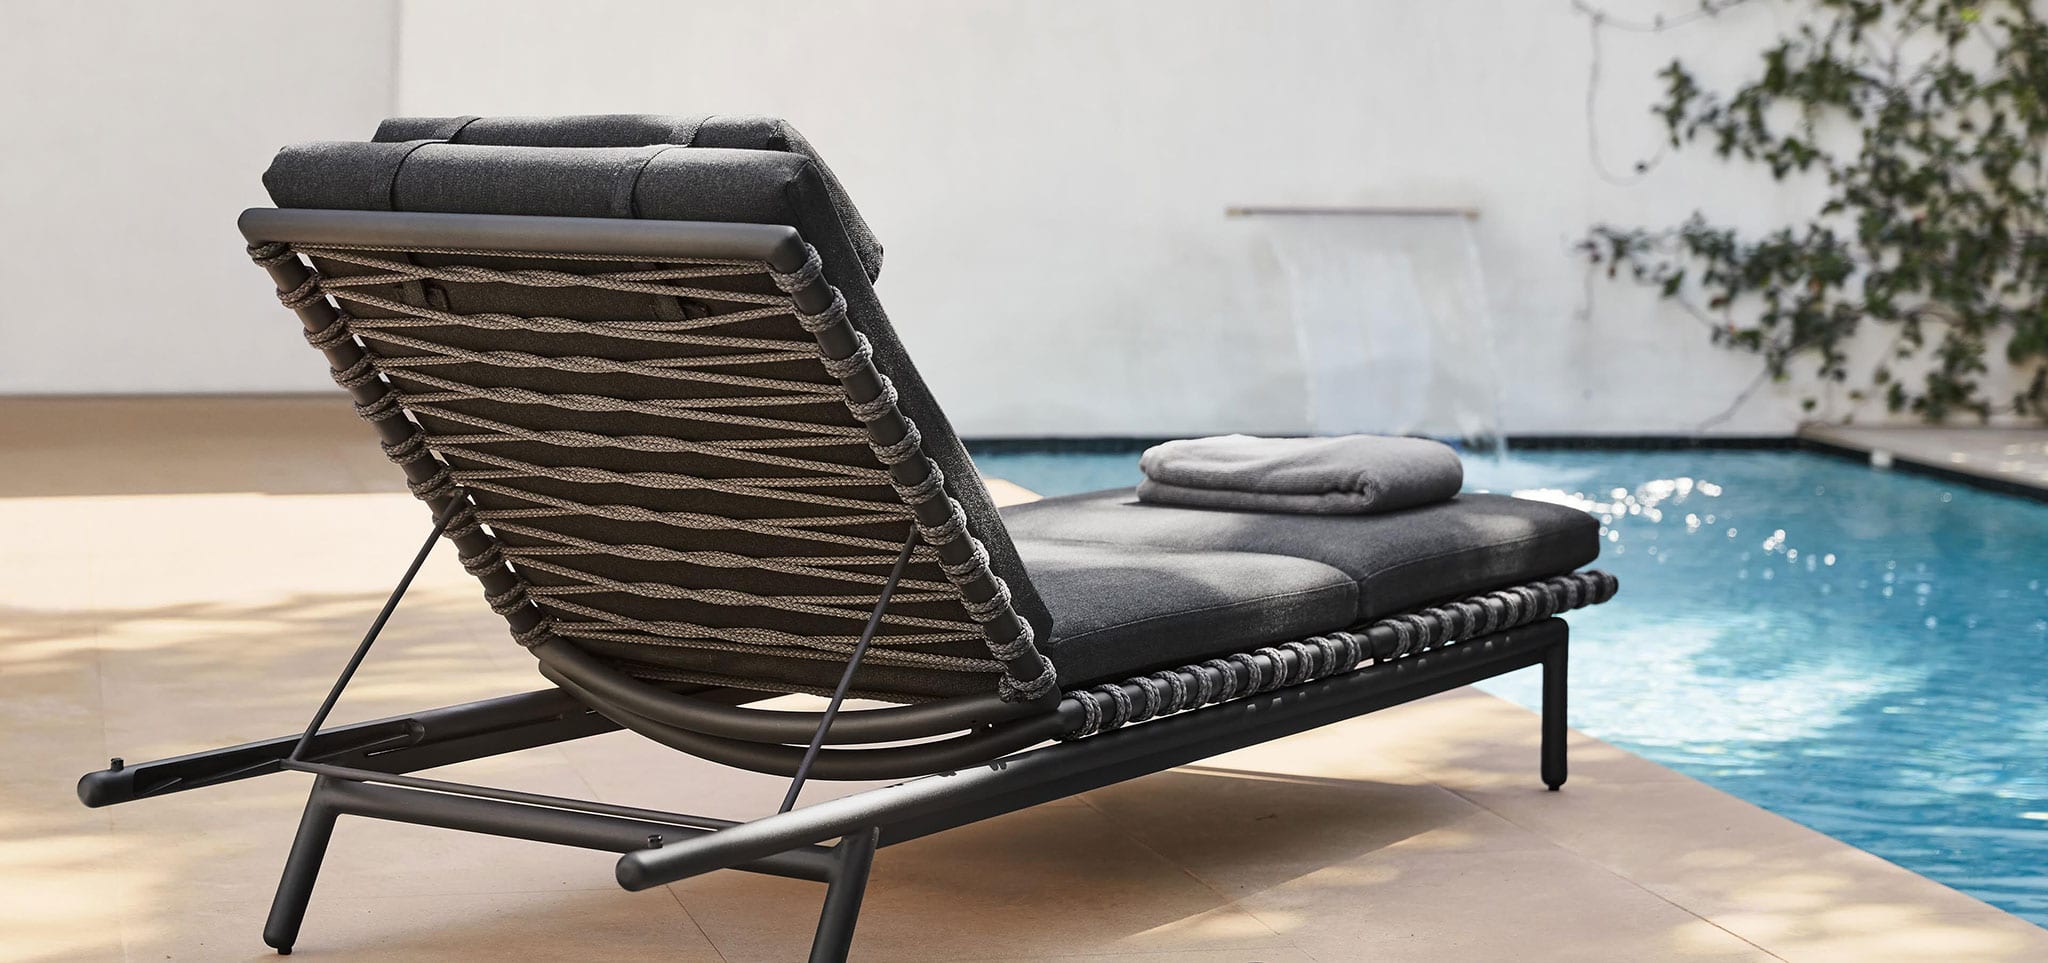 Oscar chaise with dark colored thick cushions from Brown Jordan has a towel folded on it as it sits on a patio facing a luxurious pool